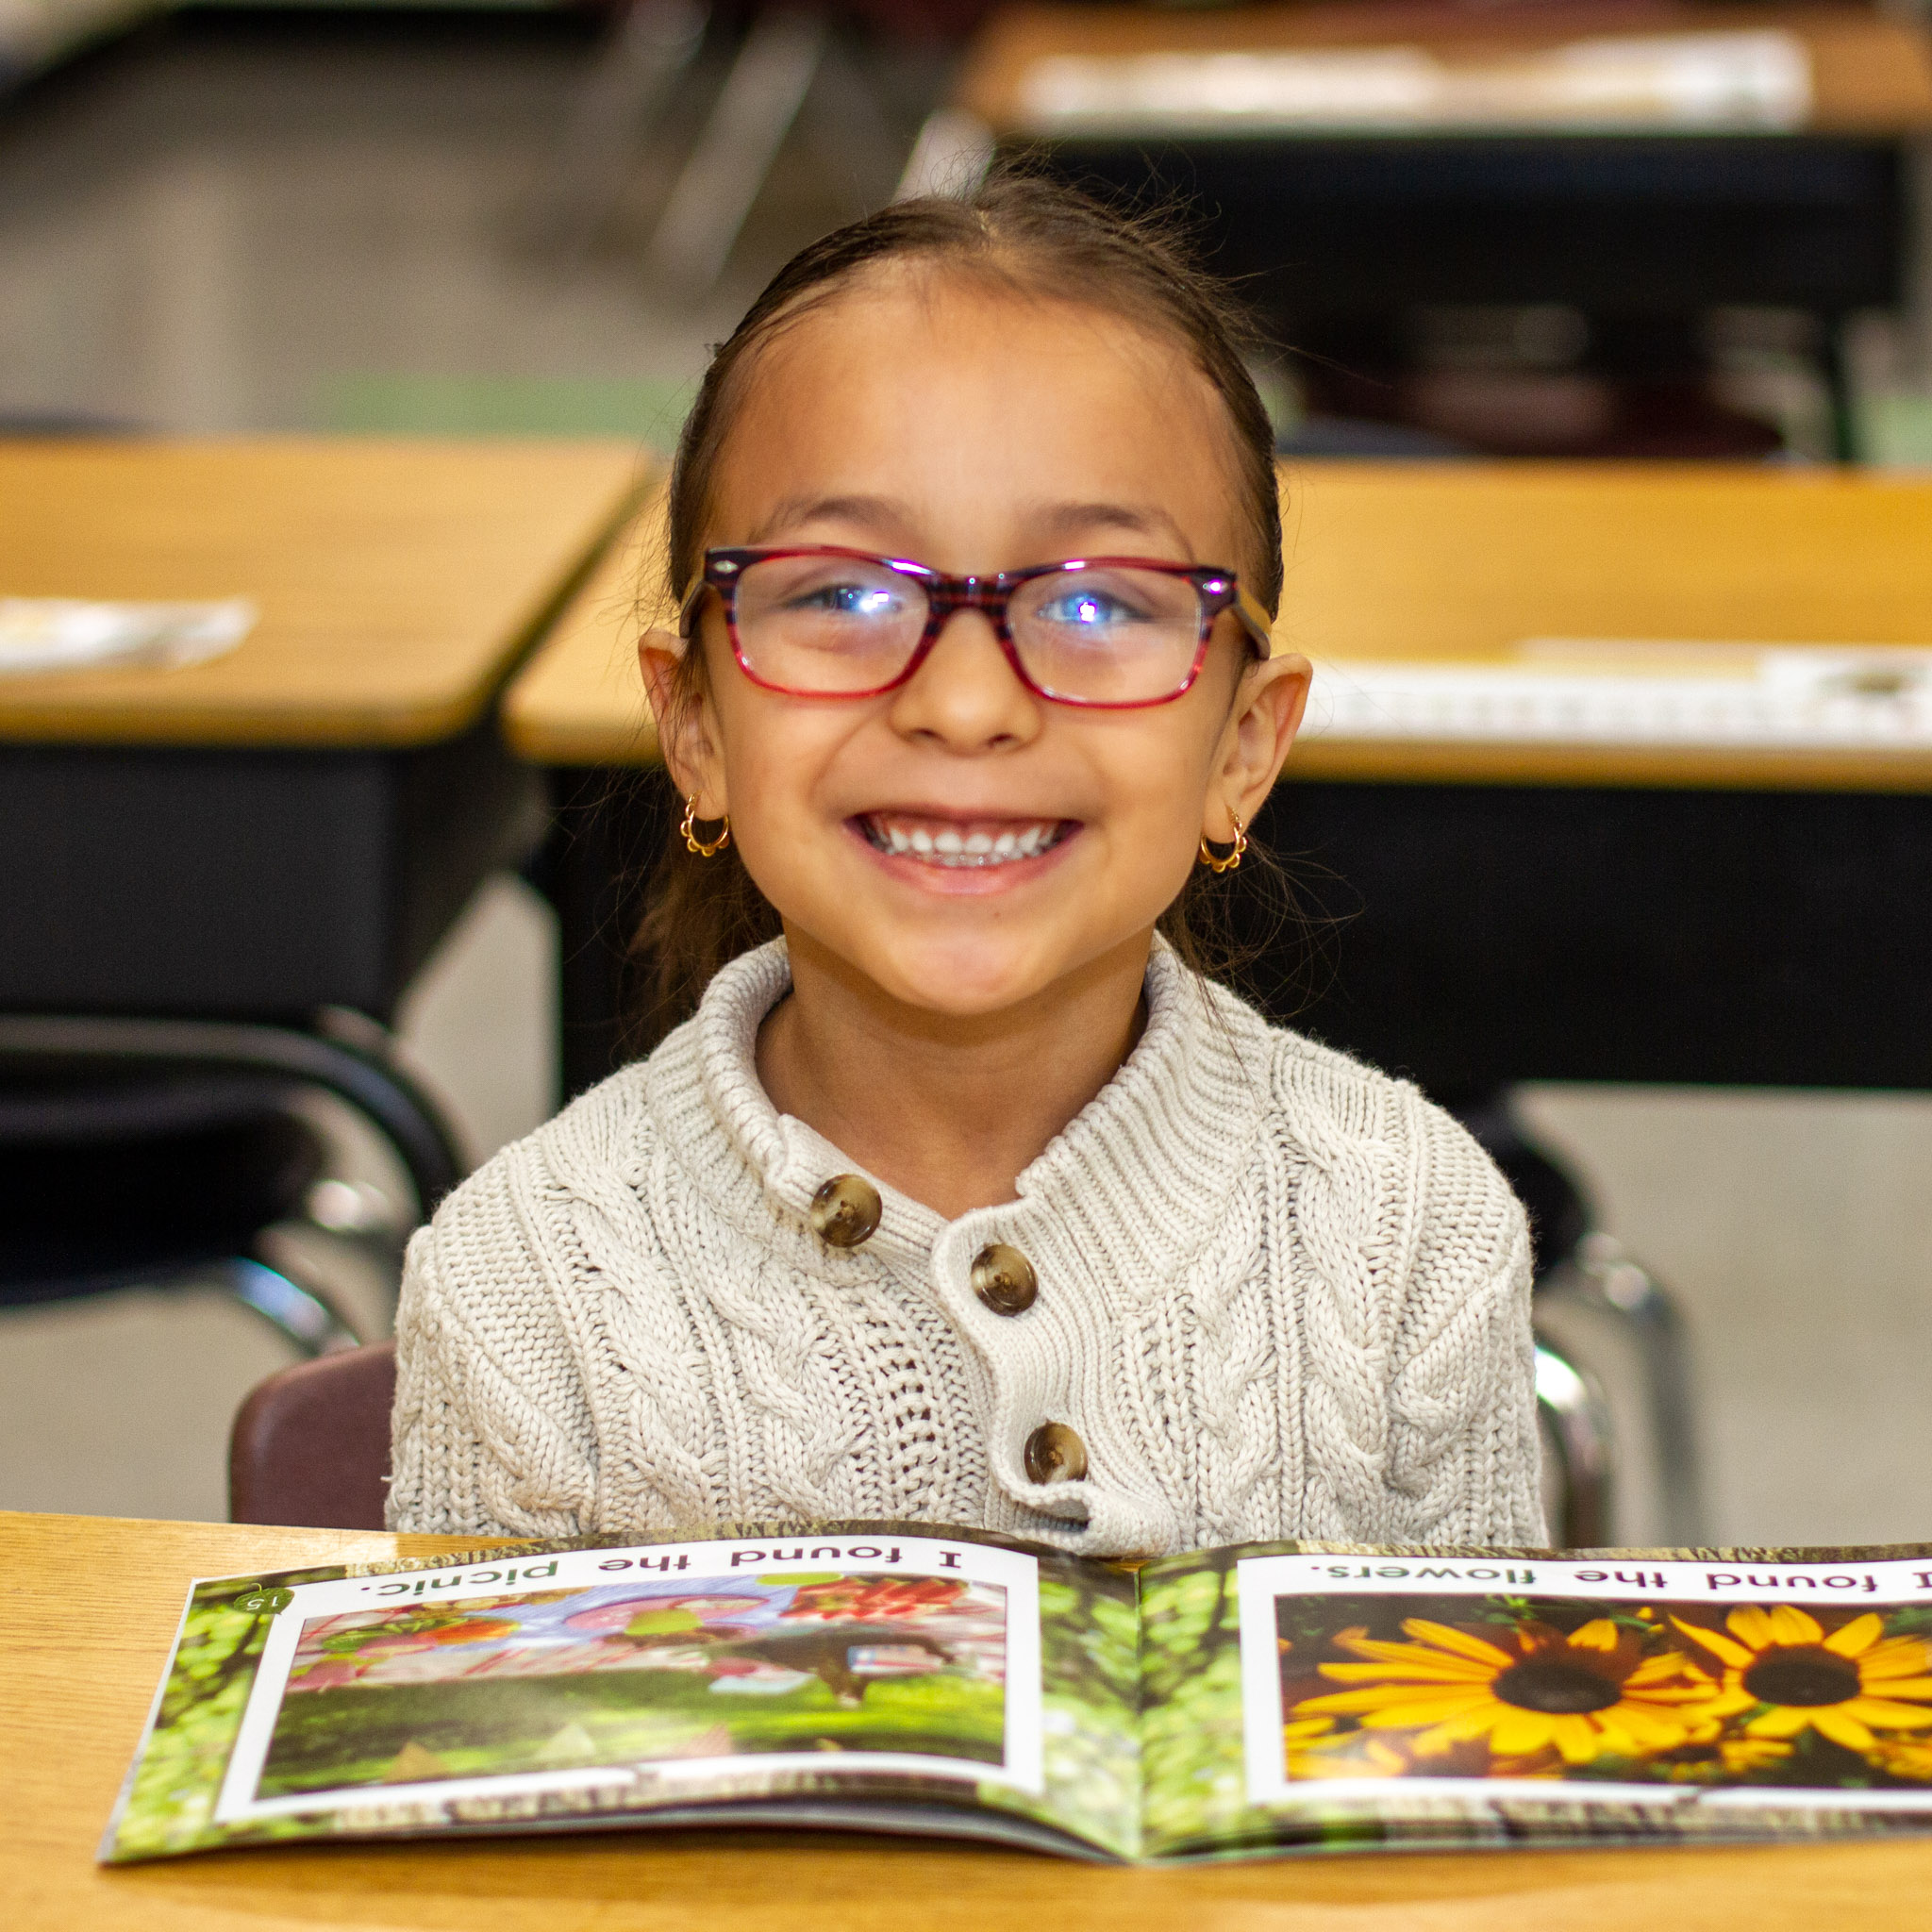 A kindergarten girl in a white button up top and glasses smiles at the camera with an open picture book on her desk